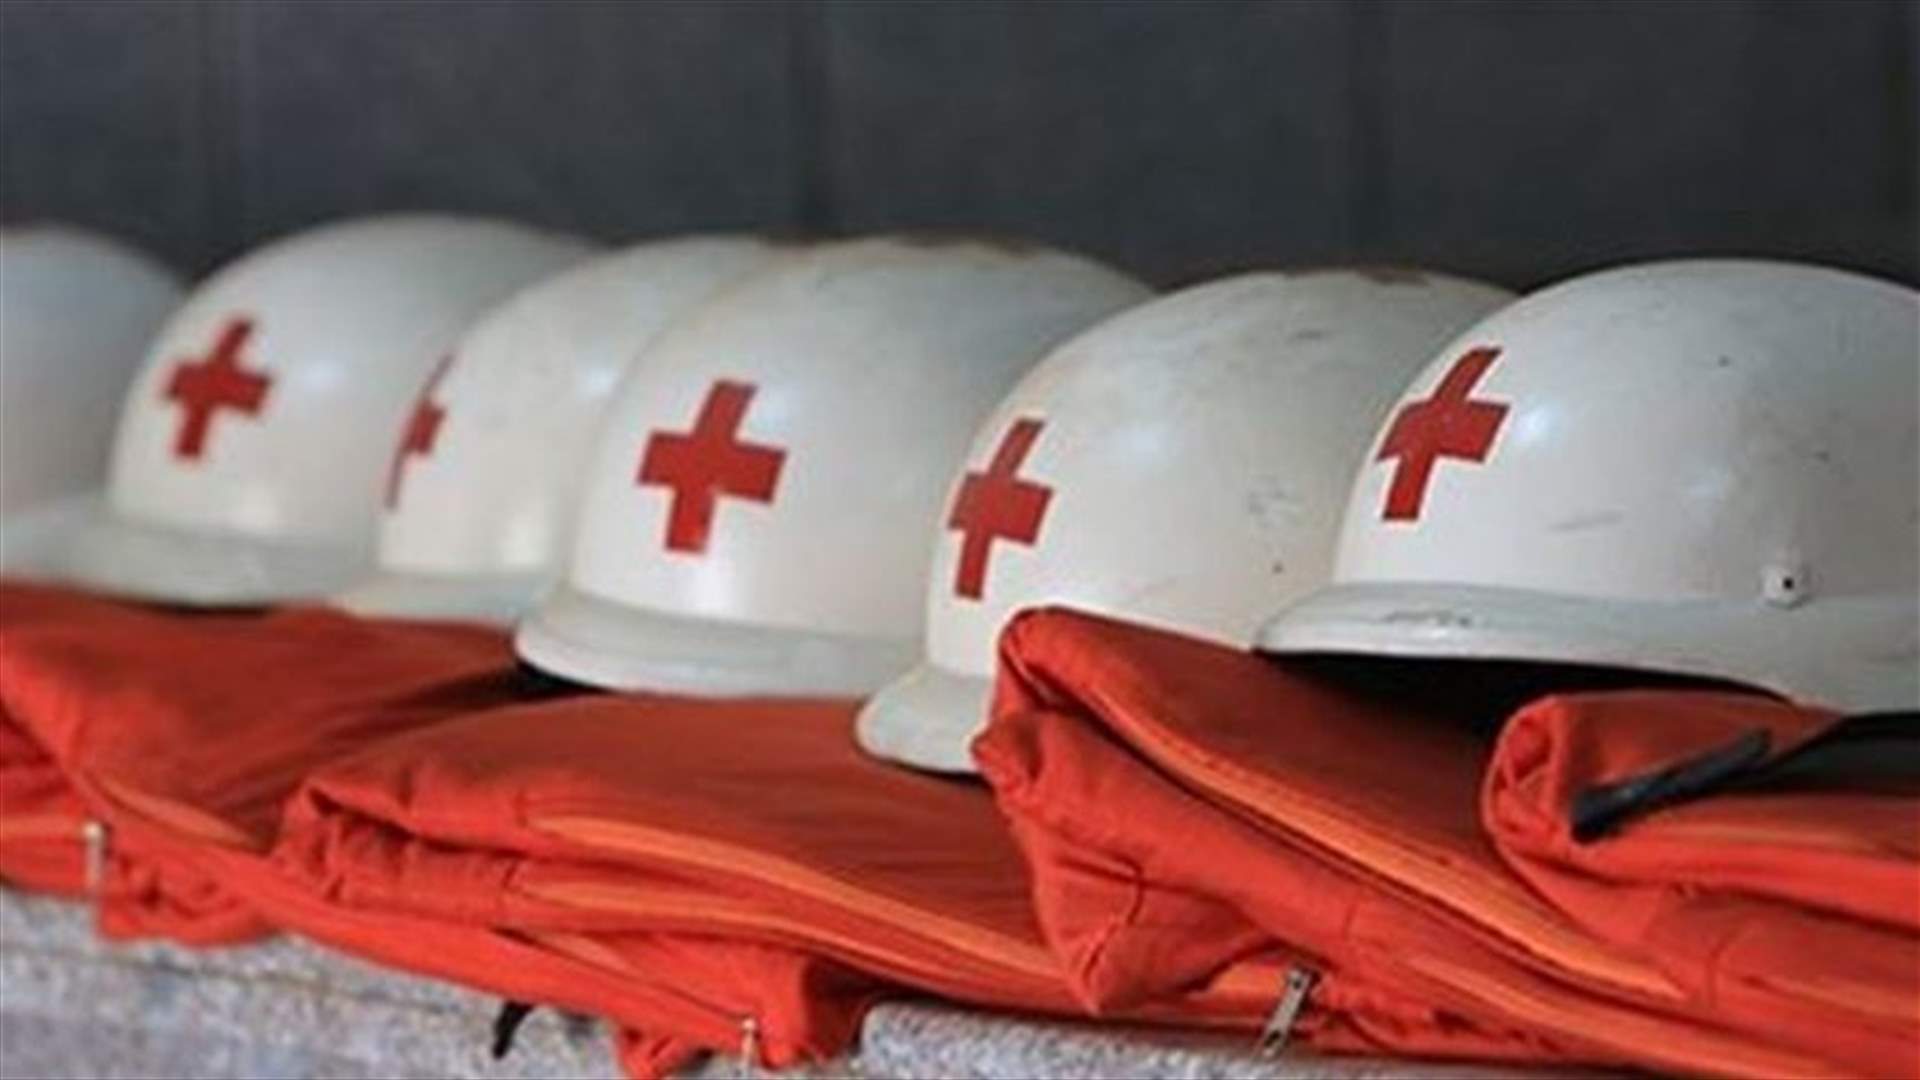 Lebanese Red Cross: We are fully ready to provide help on NYE